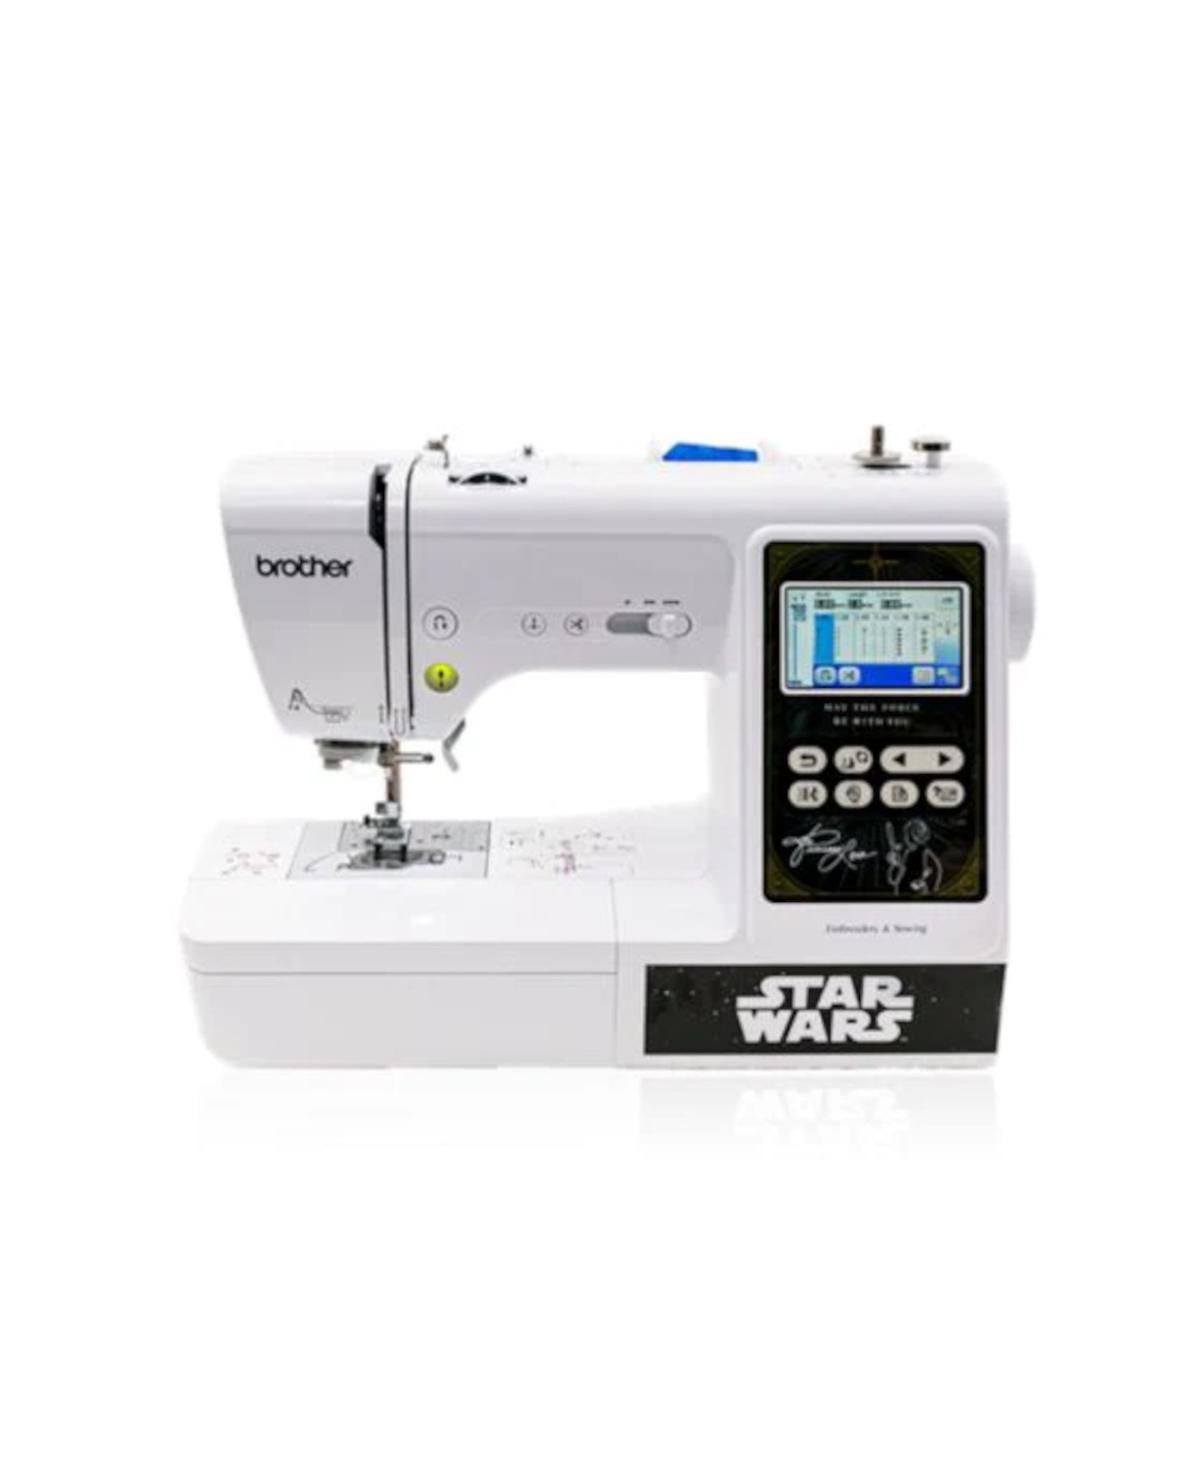 LB5500S Star Wars Sewing and Embroidery Machine 4x4 - White